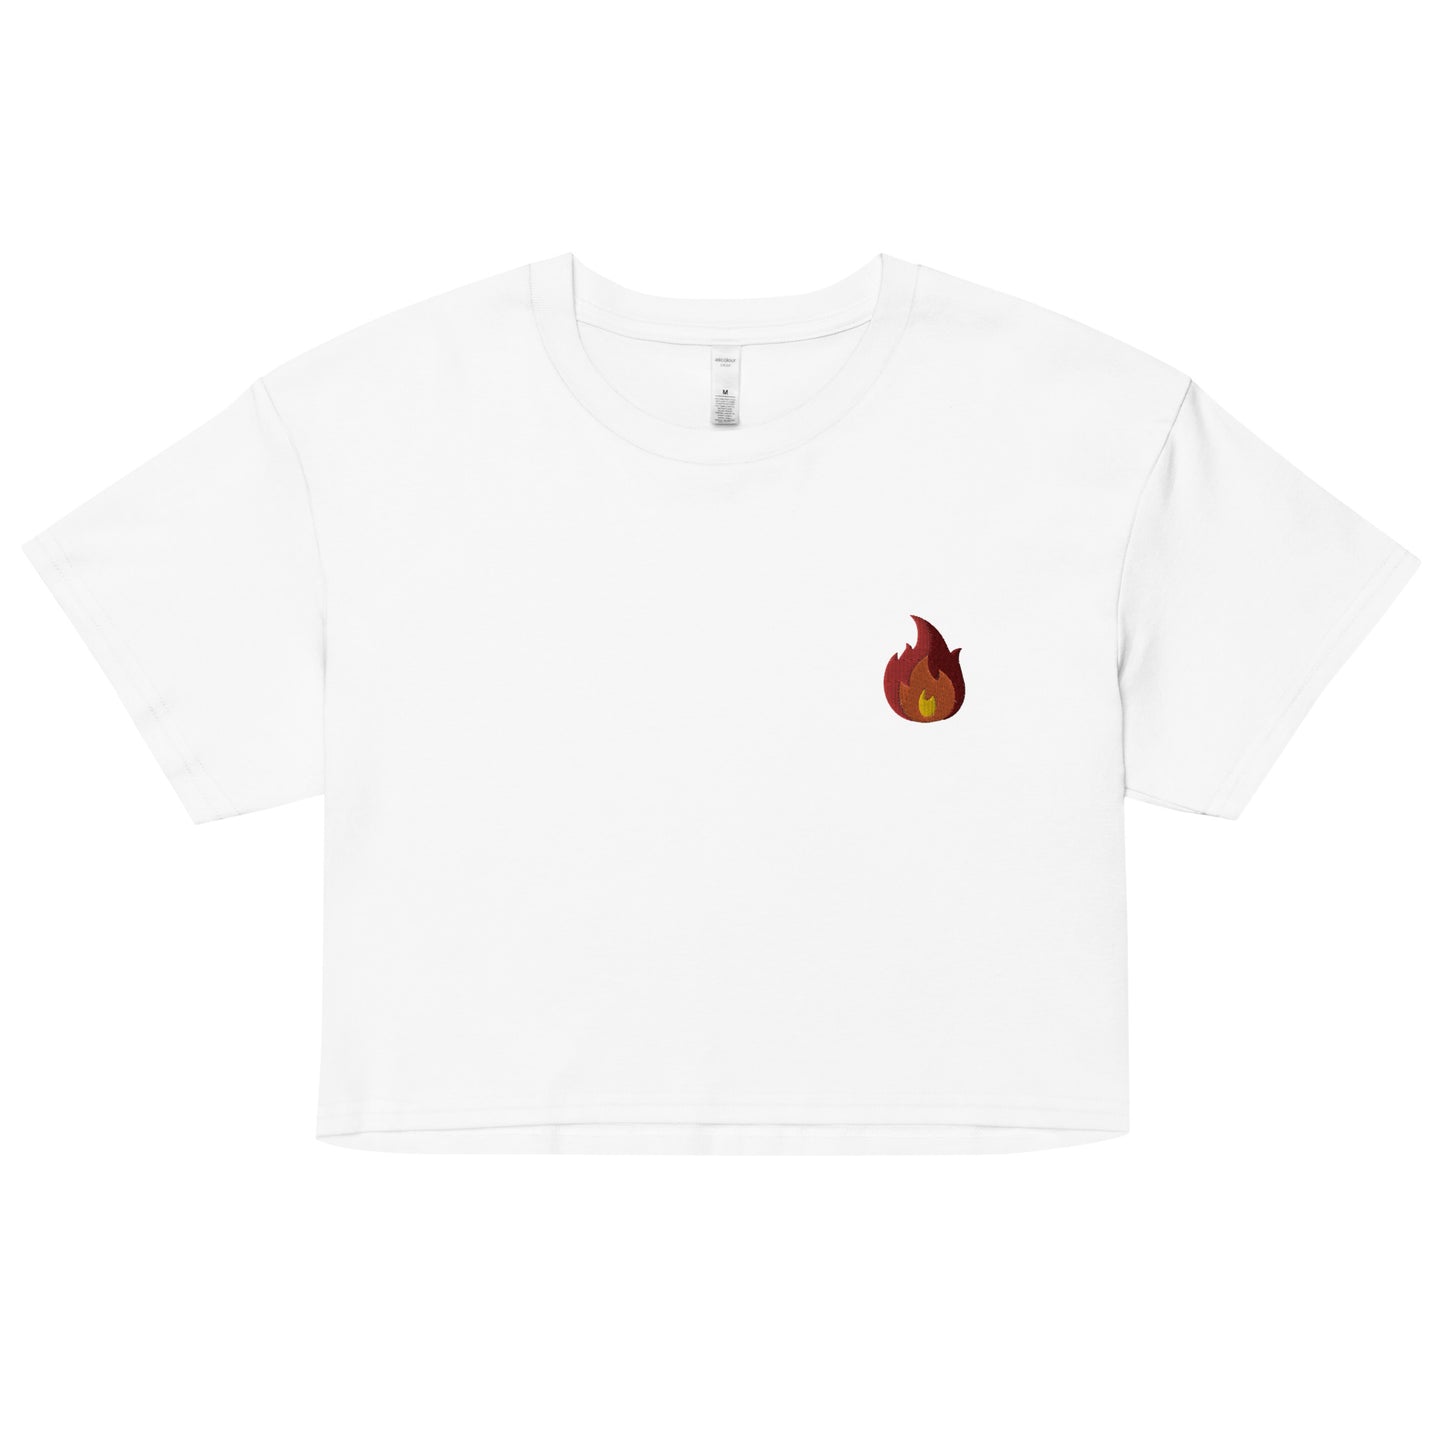 A relaxed white crop top features a modest crop and subtle fire emoji embroidered design, adding a touch of mischief to your look—a playful celebration of gay culture! Made from 100% combed cotton. Available in Extra Small, Small, Medium, Large, Extra Large.